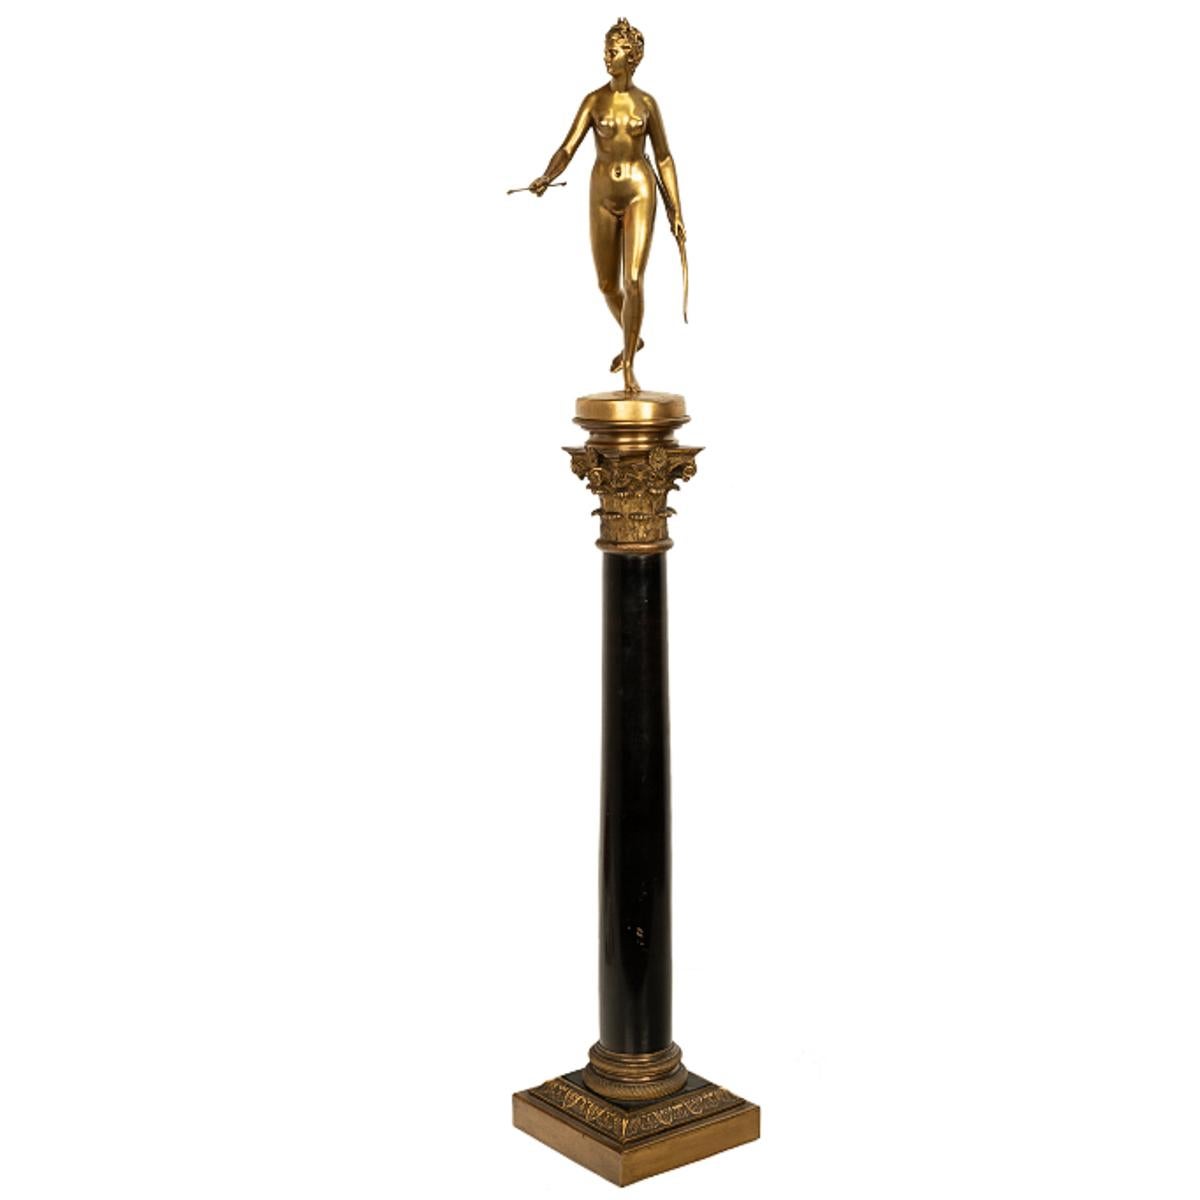 Antique French Grand Tour Gilt Bronze Statue on Column Diana the Huntress 1838 - Sculpture by Ferdinand Barbedienne